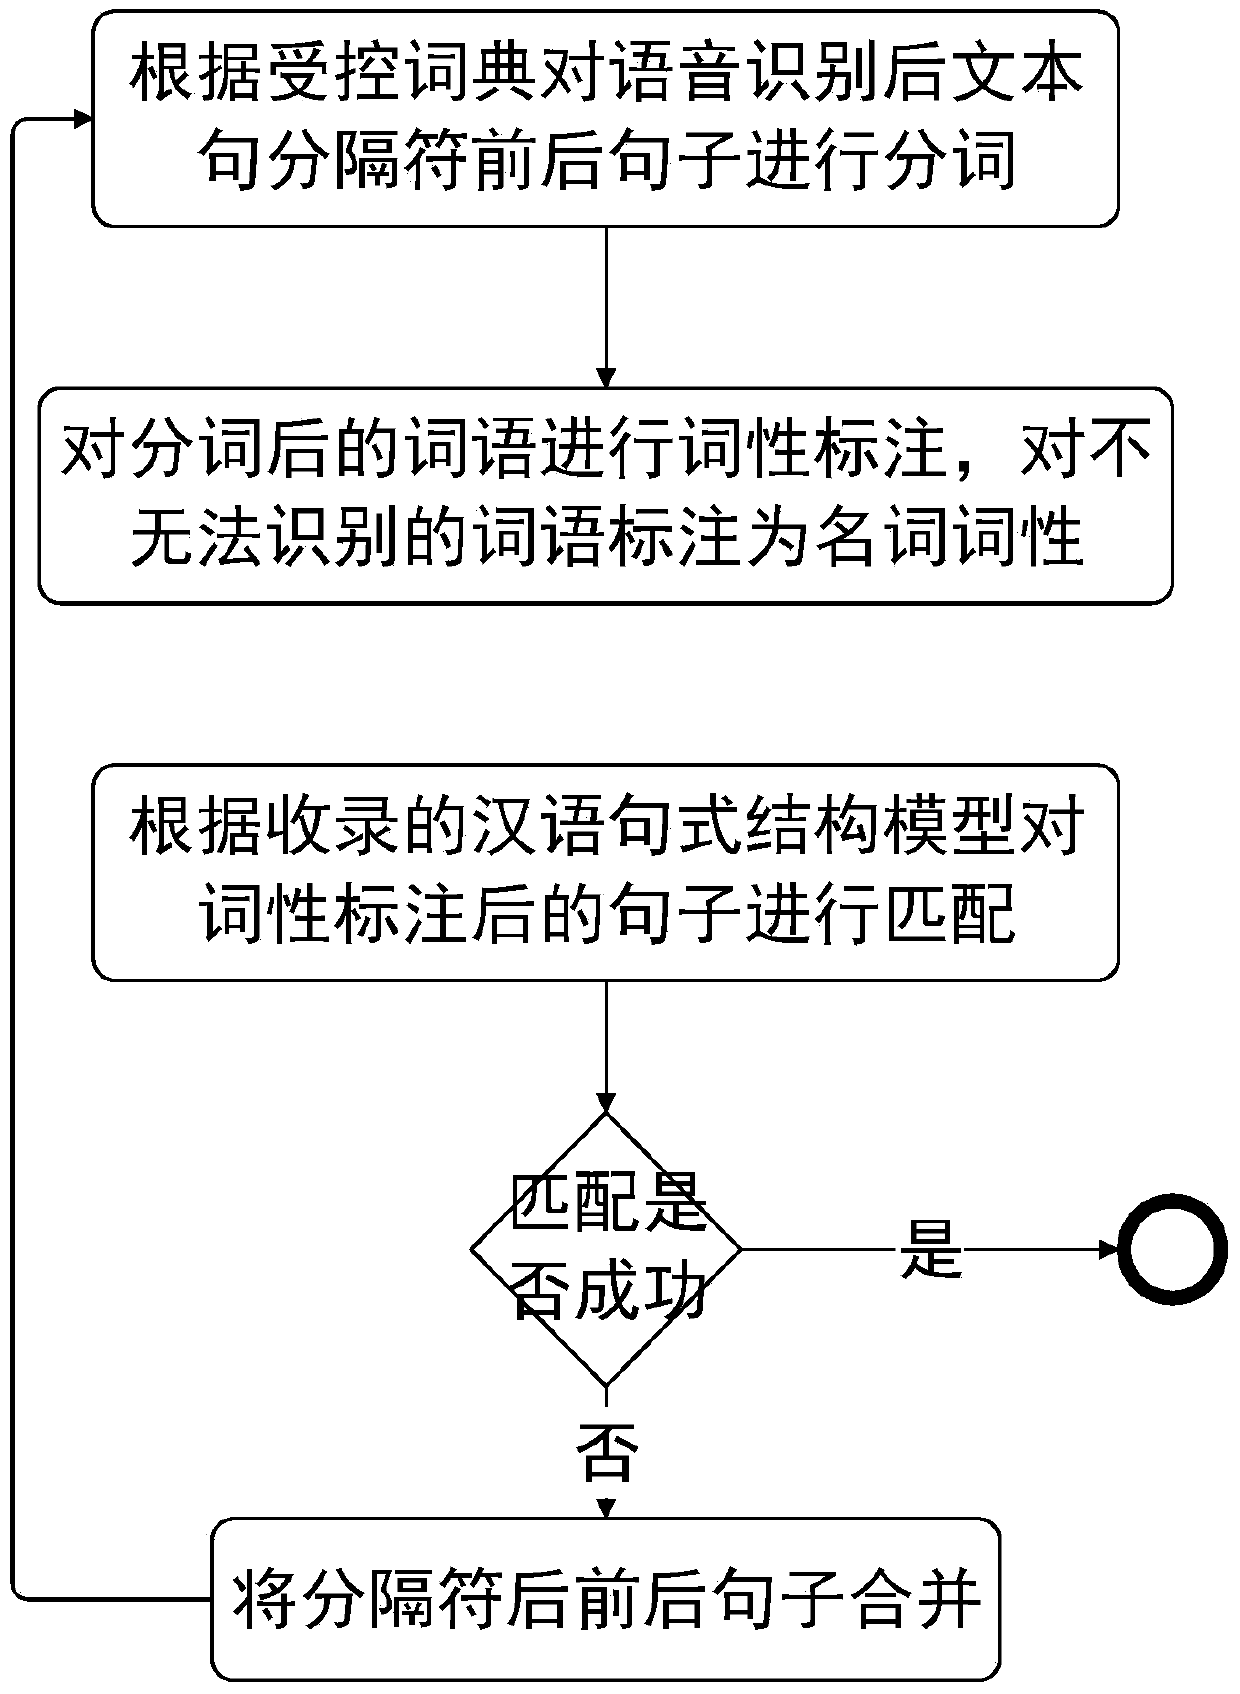 A field-based text error correction method and system after speech recognition with feedback